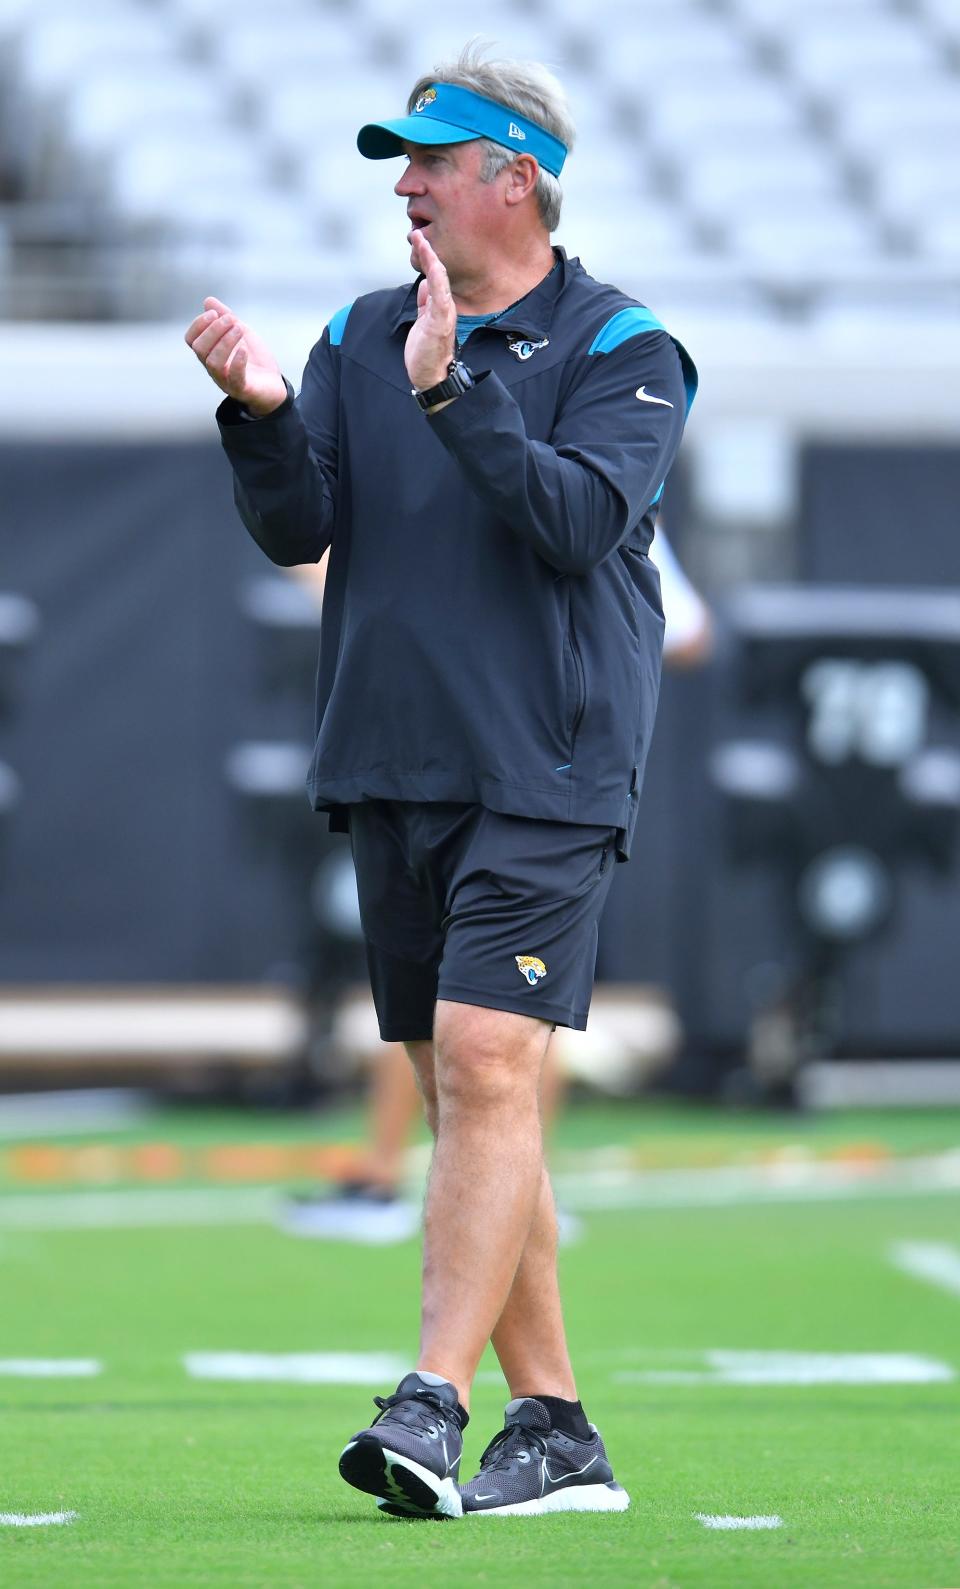 Jaguars head coach Doug Pederson encourages players on Monday during the first OTA practice of the off-season, at TIAA Bank Field.